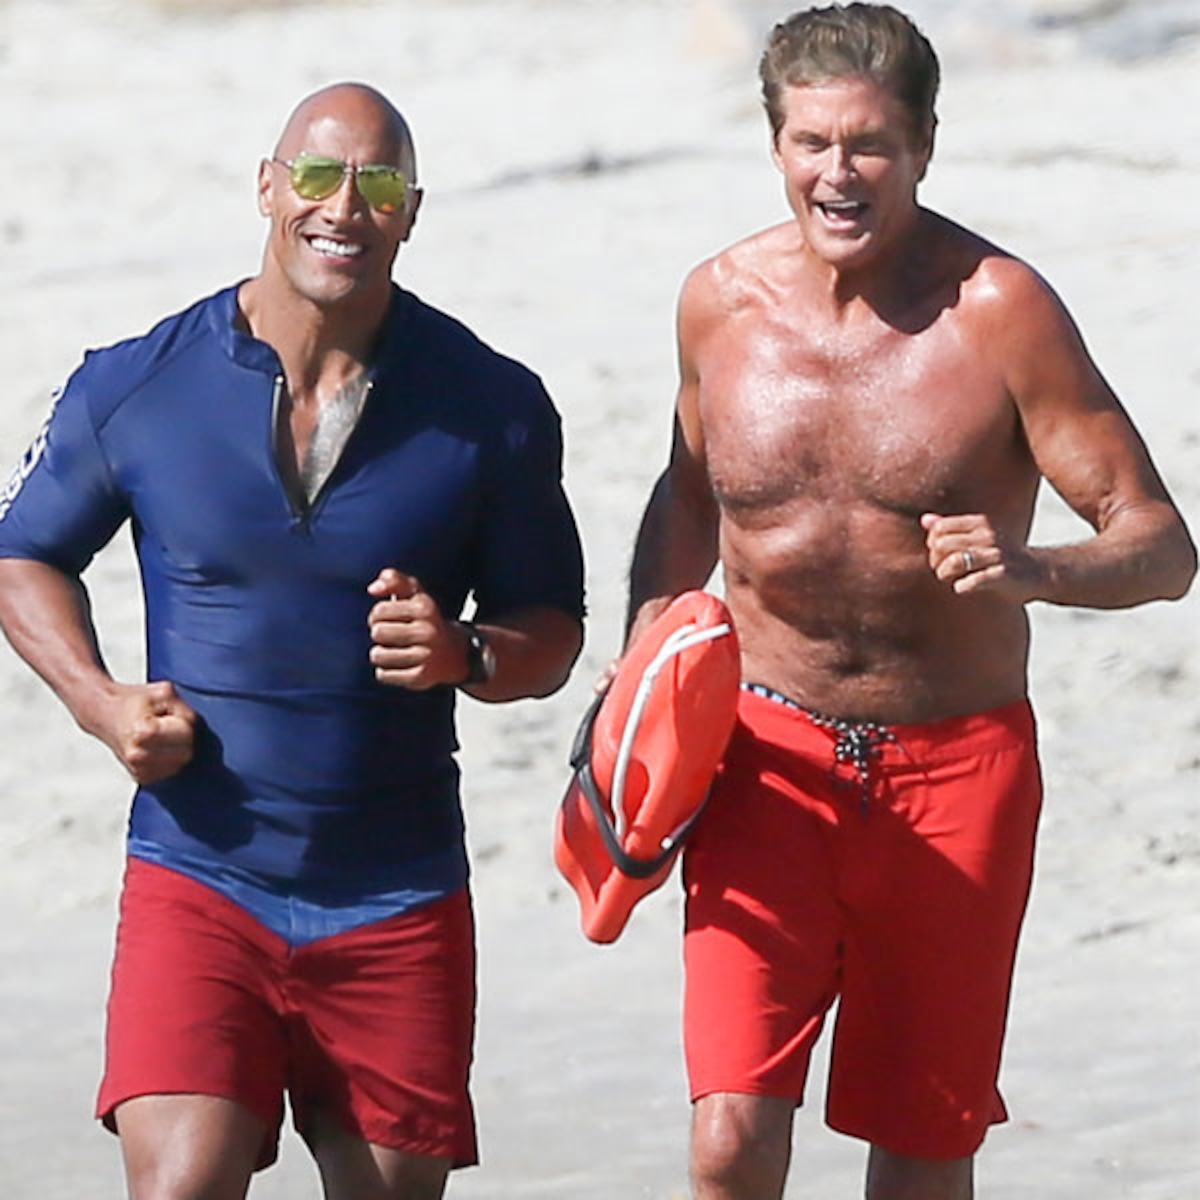 Baywatch Zac Efron Dwayne Johnson And Kelly Rohrbach Wallpapers